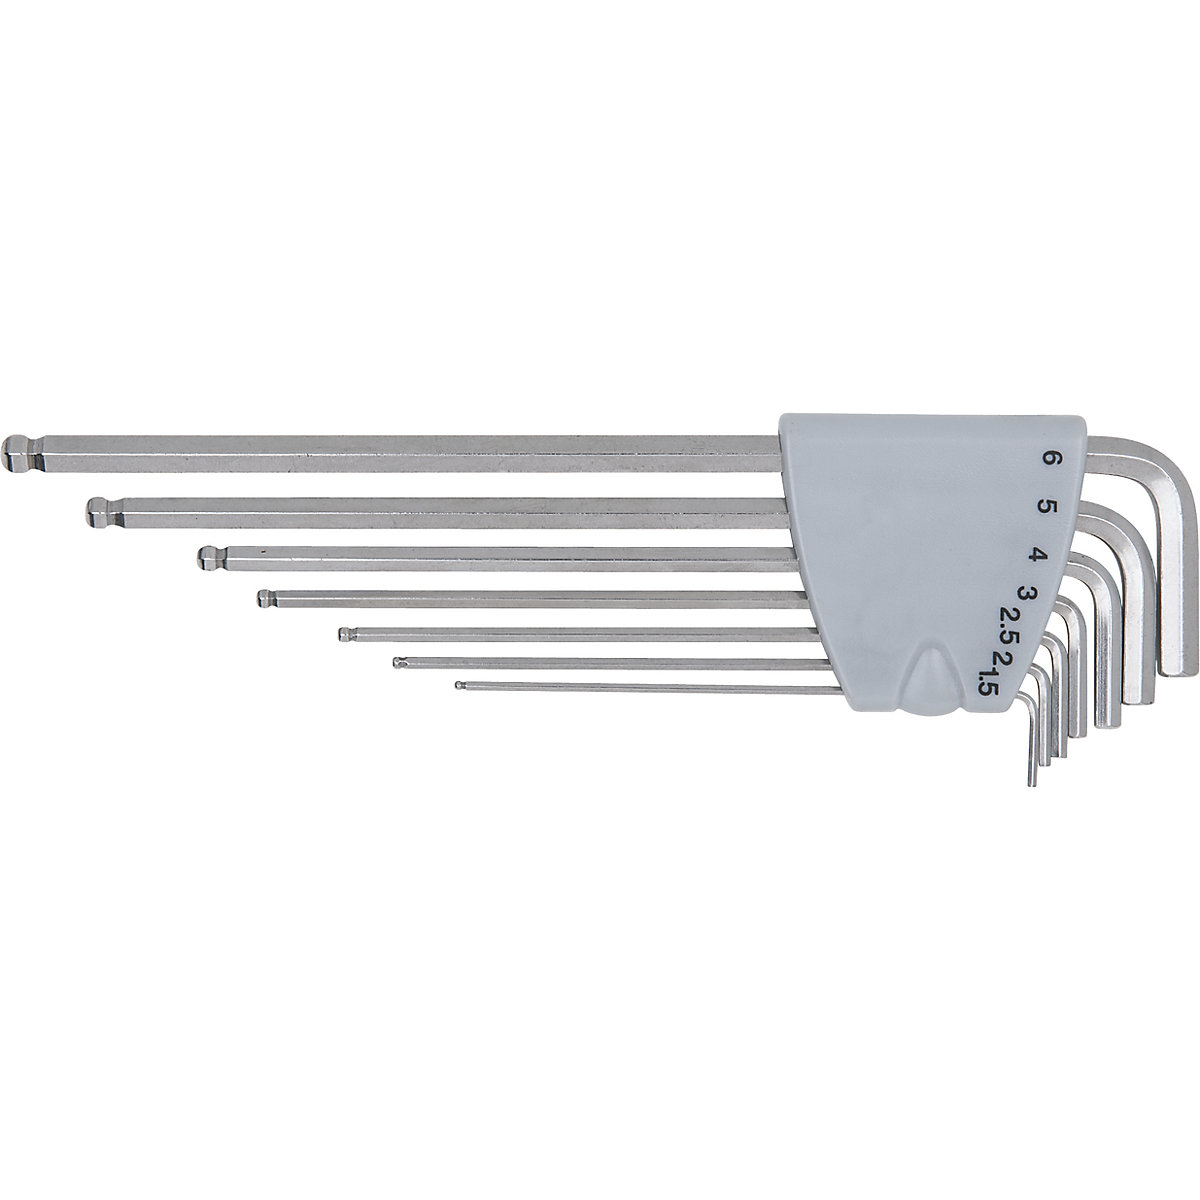 Stainless steel angle key wrench set, XL - KS Tools